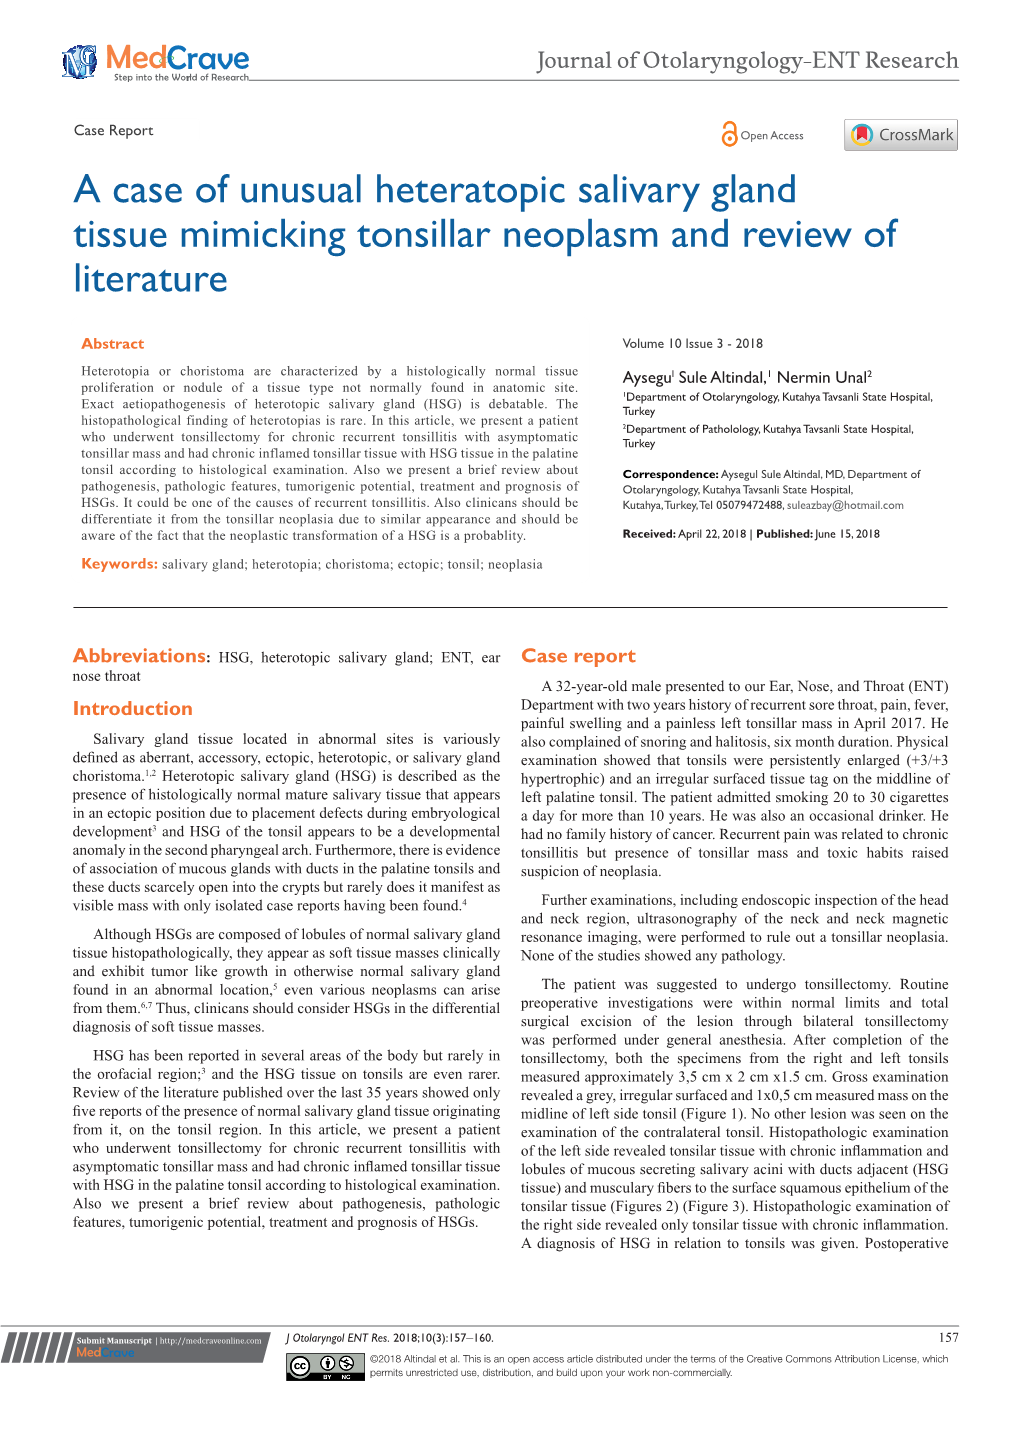 A Case of Unusual Heteratopic Salivary Gland Tissue Mimicking Tonsillar Neoplasm and Review of Literature